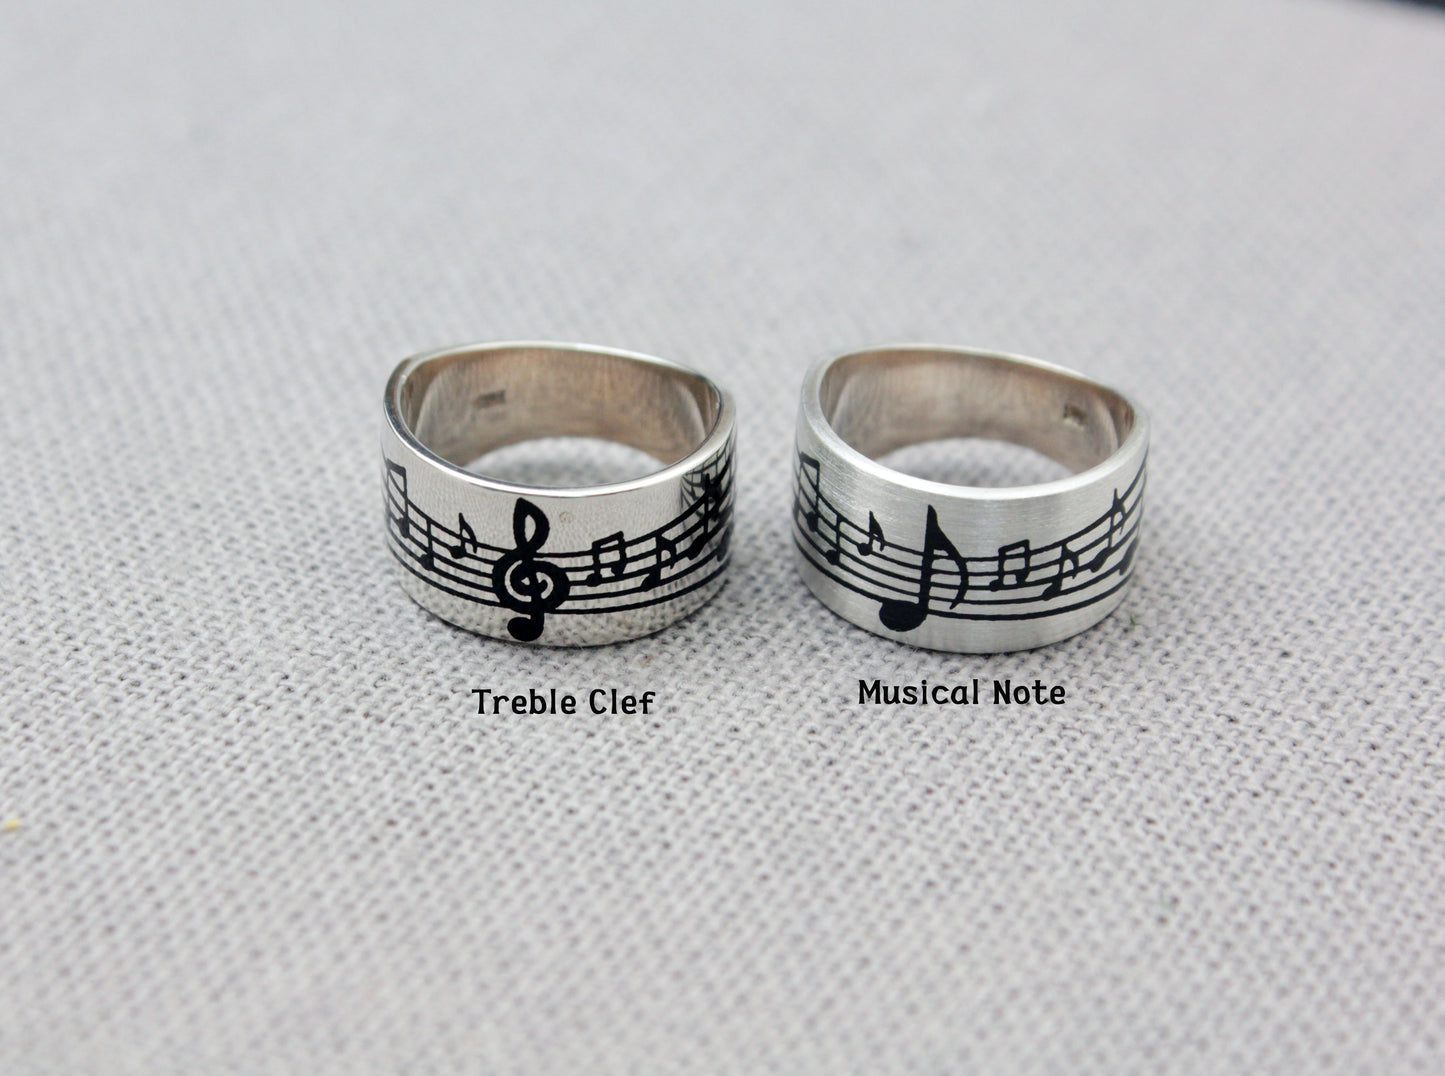 925 Sterling Silver Music note Score Ring, Treble Clef Ring, Manuscript paper Ring